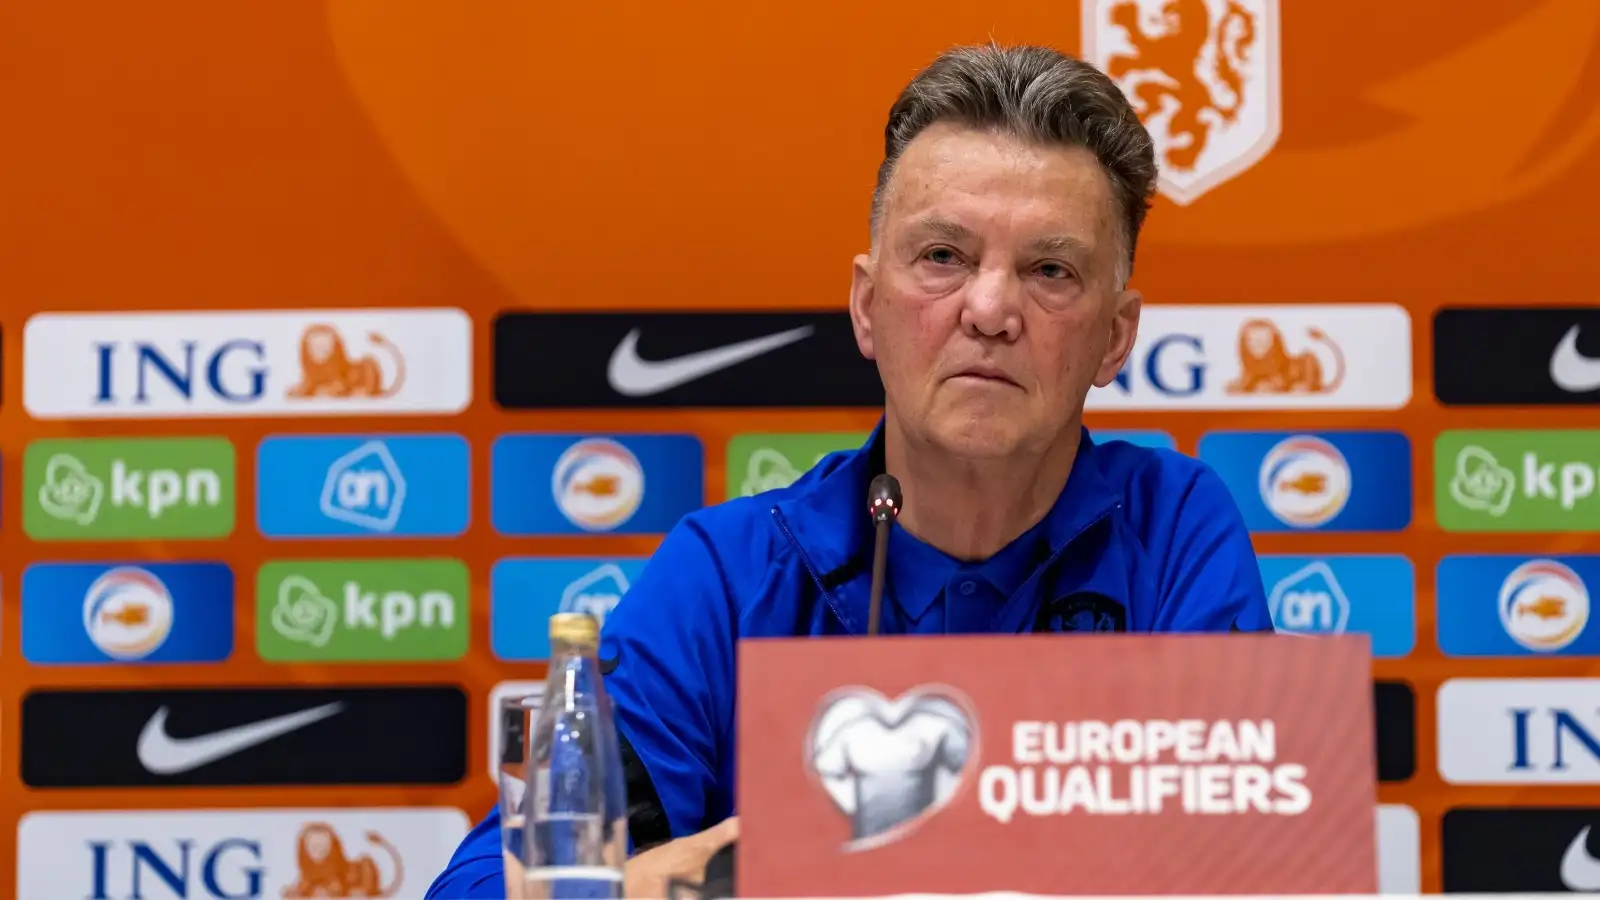 Louis Van Gaal during a press conference